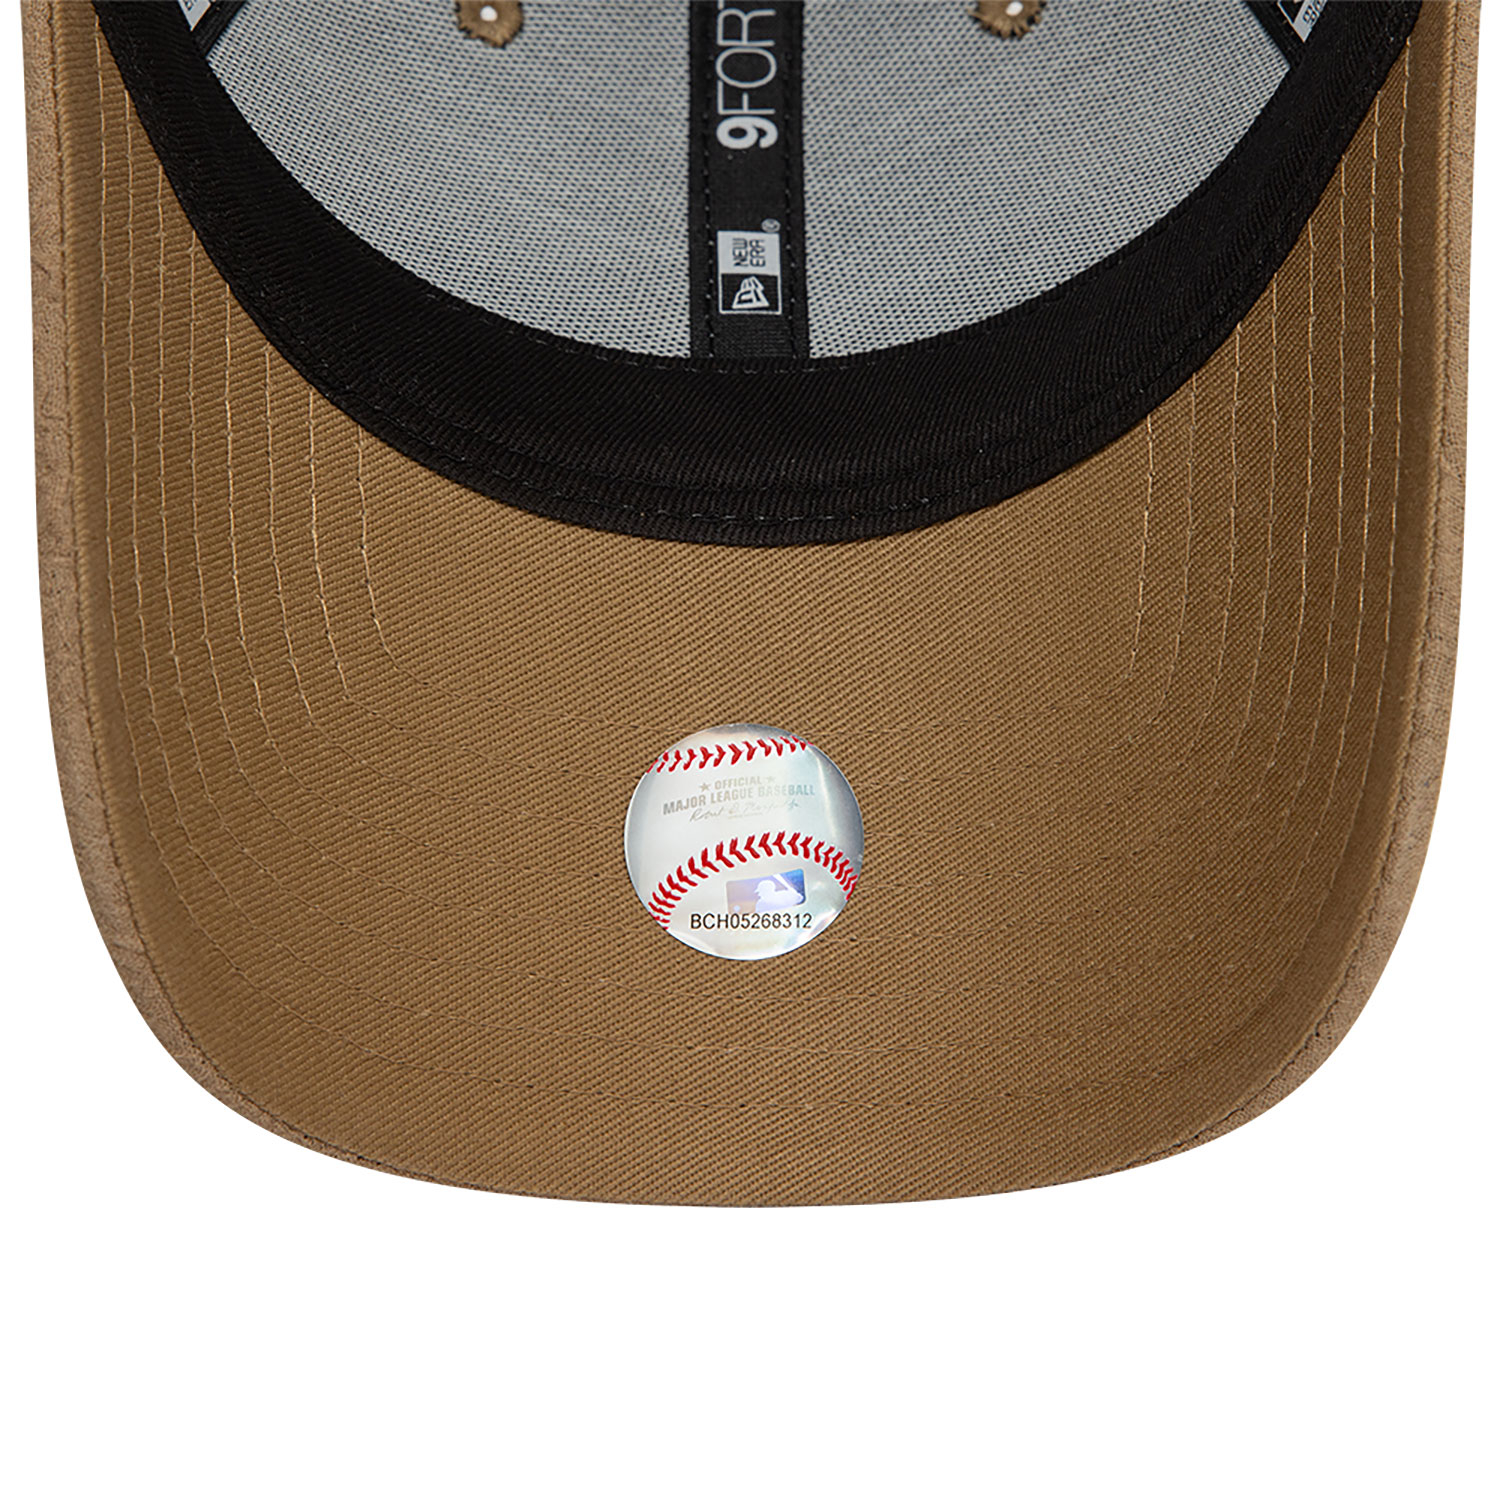 Atlanta Braves Womens Bubble Stitch Brown 9FORTY Adjustable Cap